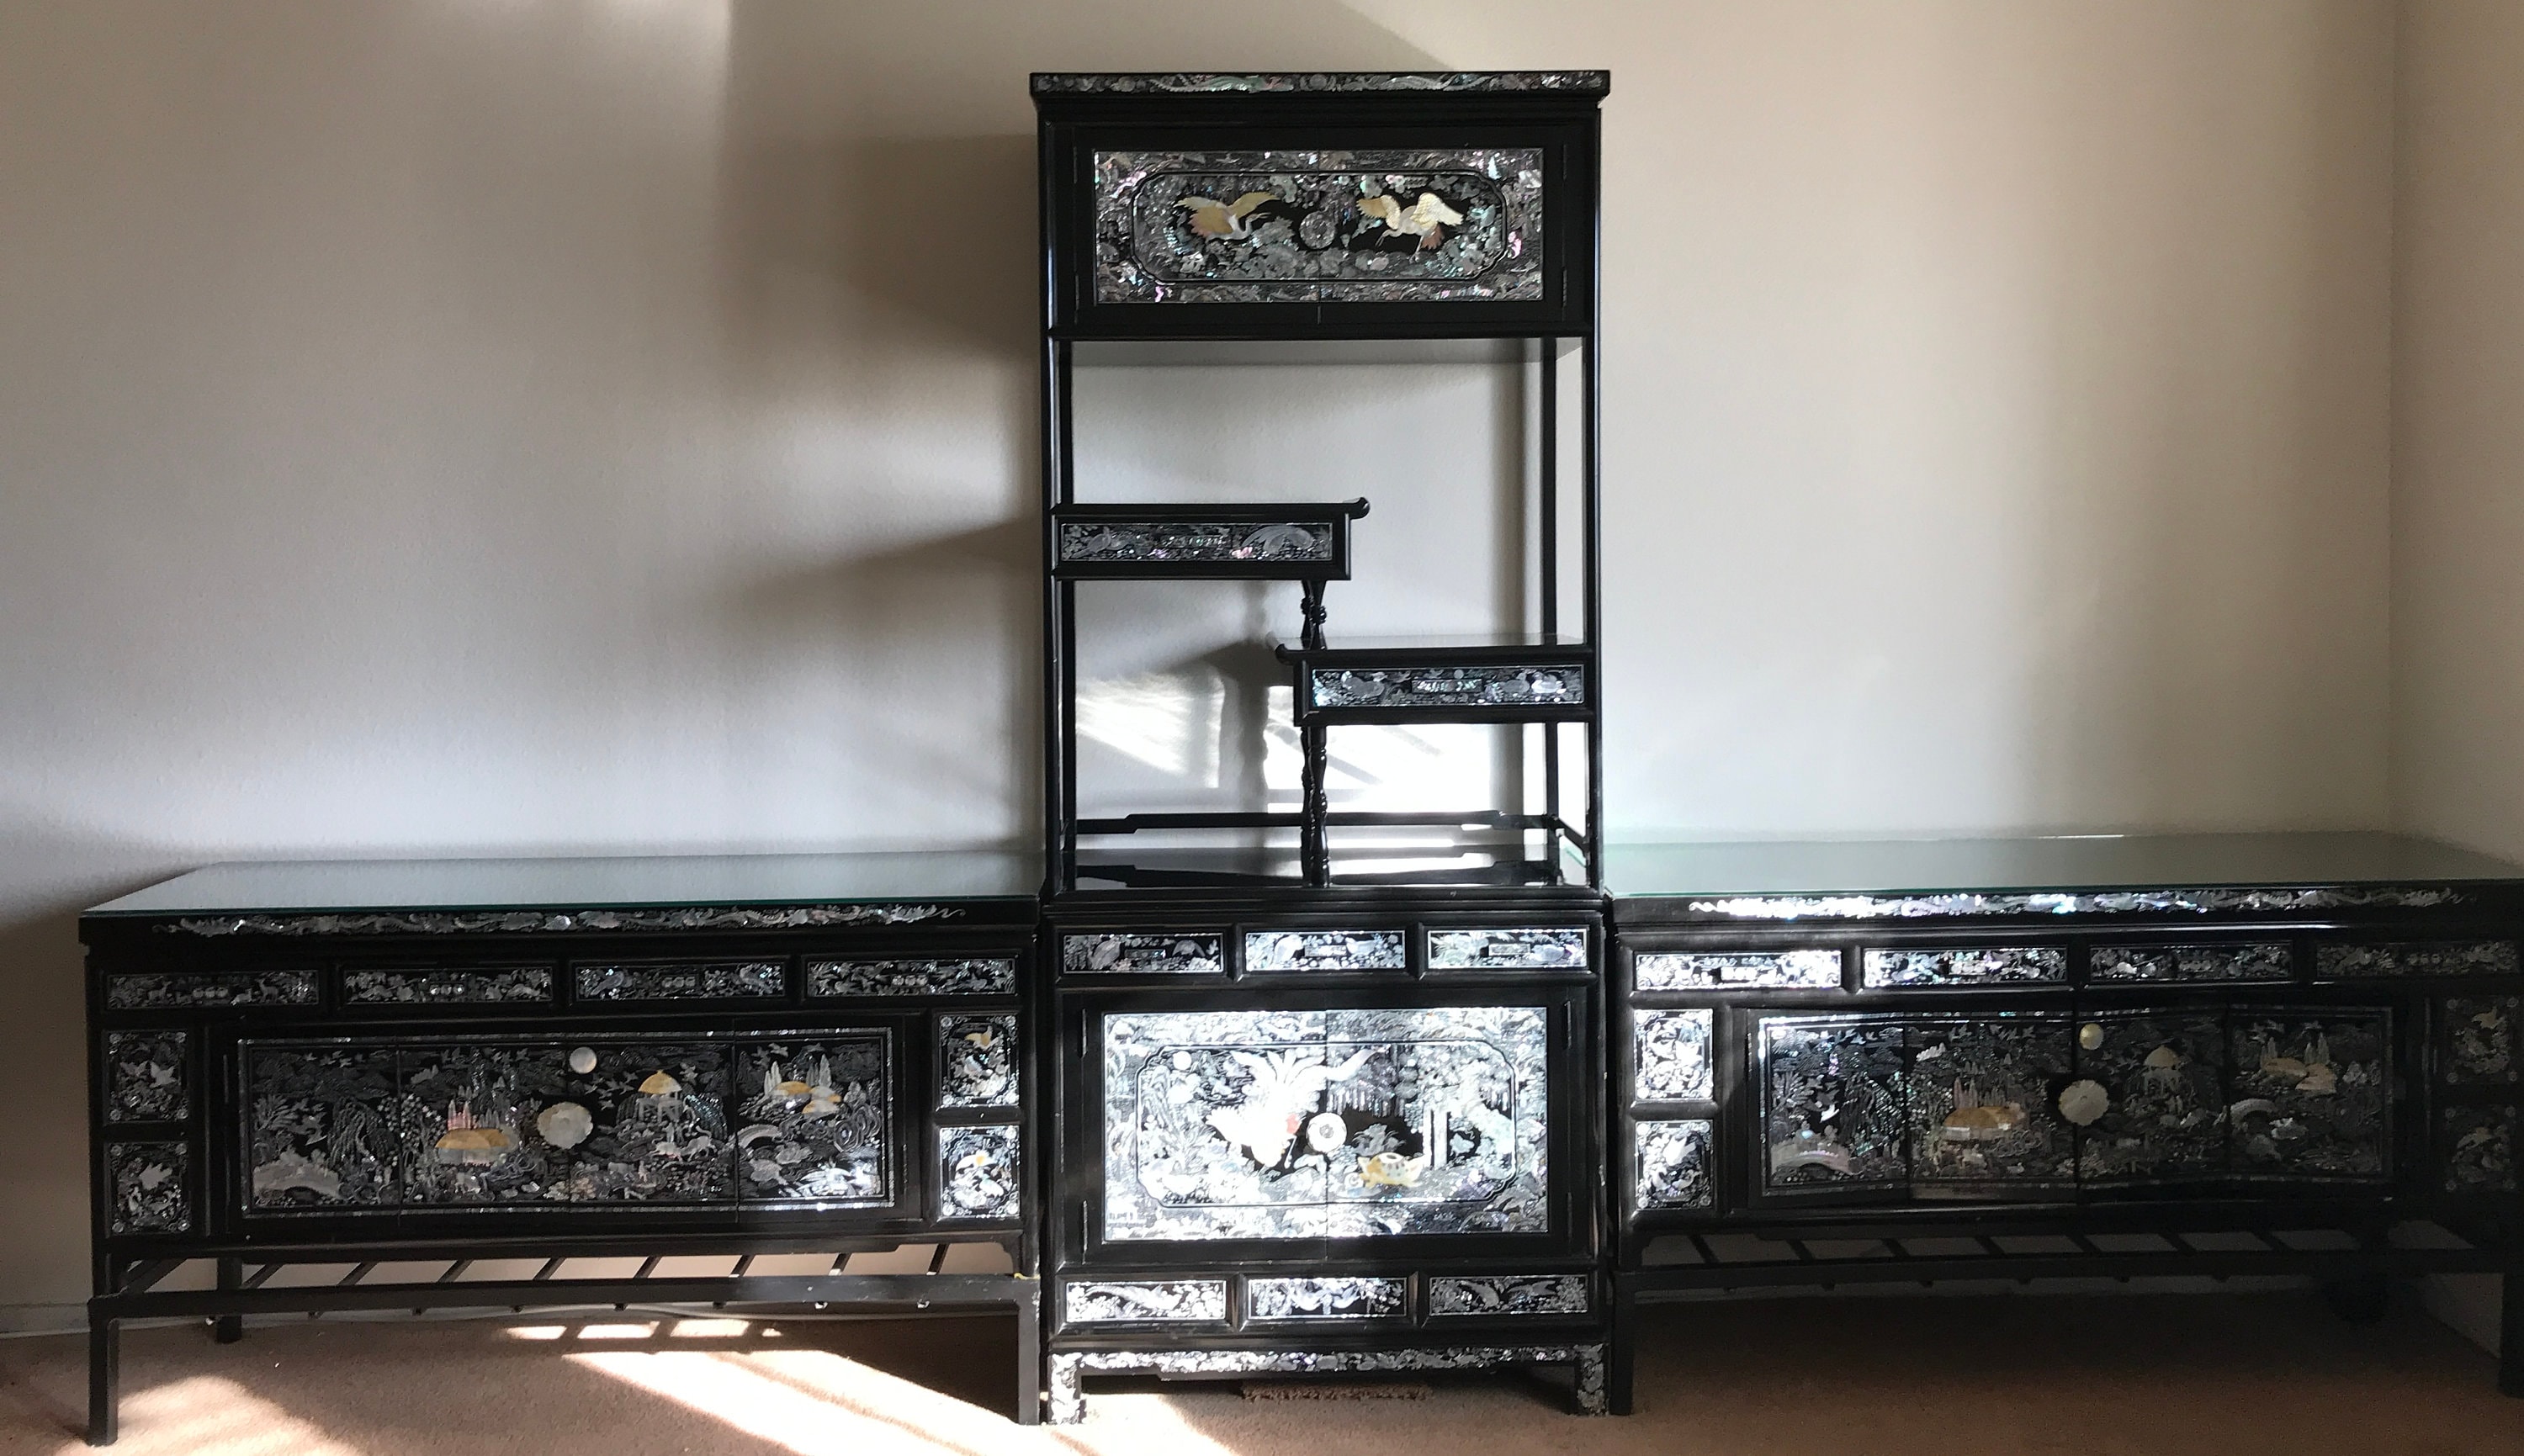 Furniture Wood on sabang Takja Black With Coated Mother-of-pearl and Ornamented - Called Etsy moongarb Lacquer